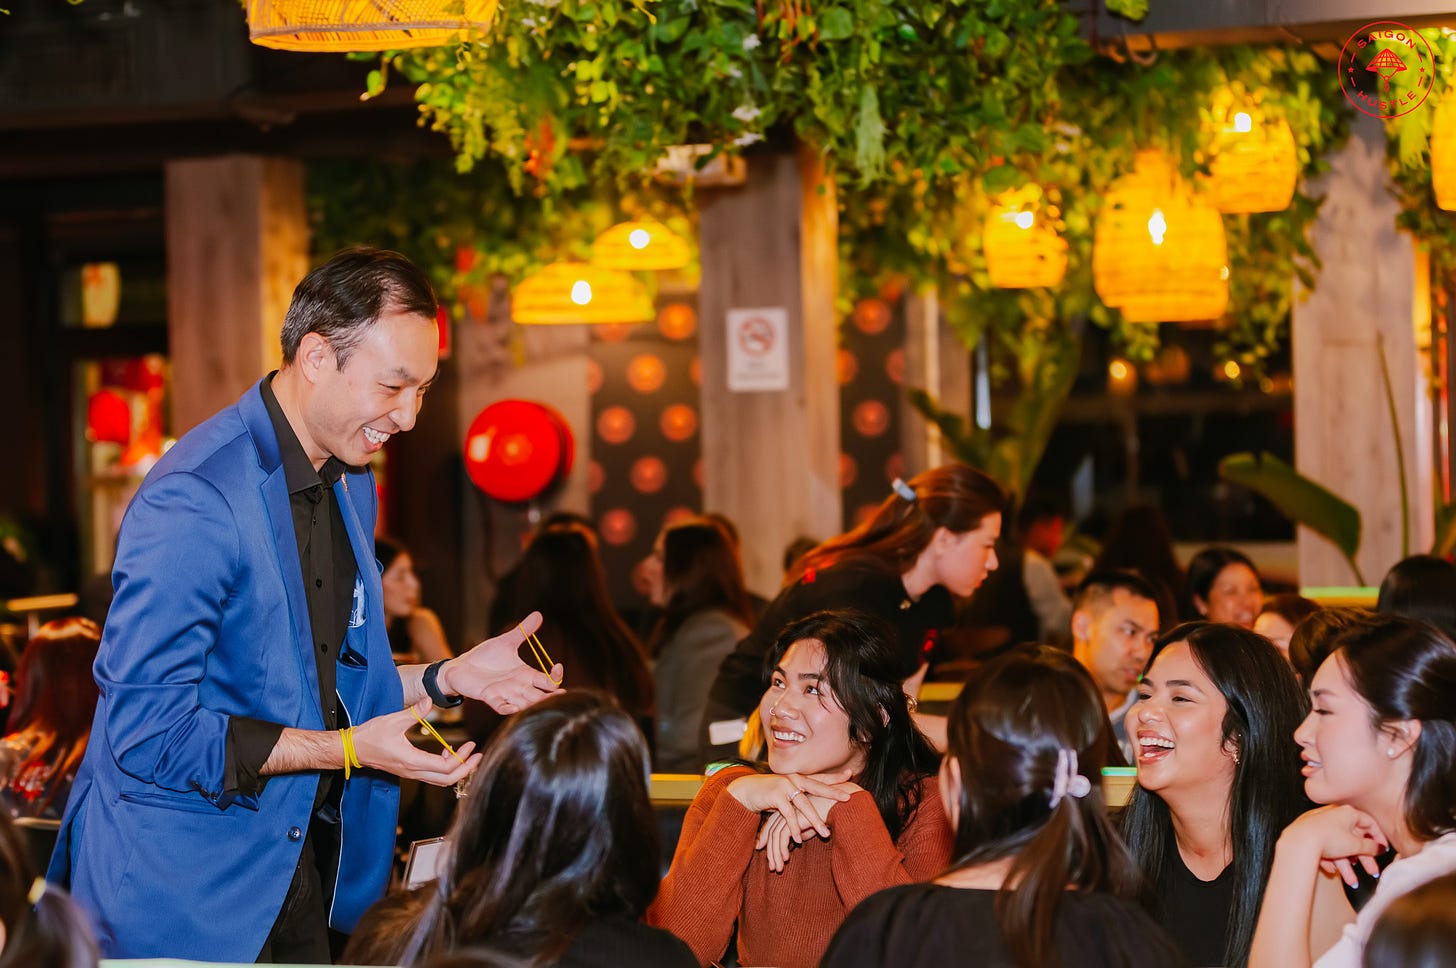 David Ung performing magic for people at a restaurant